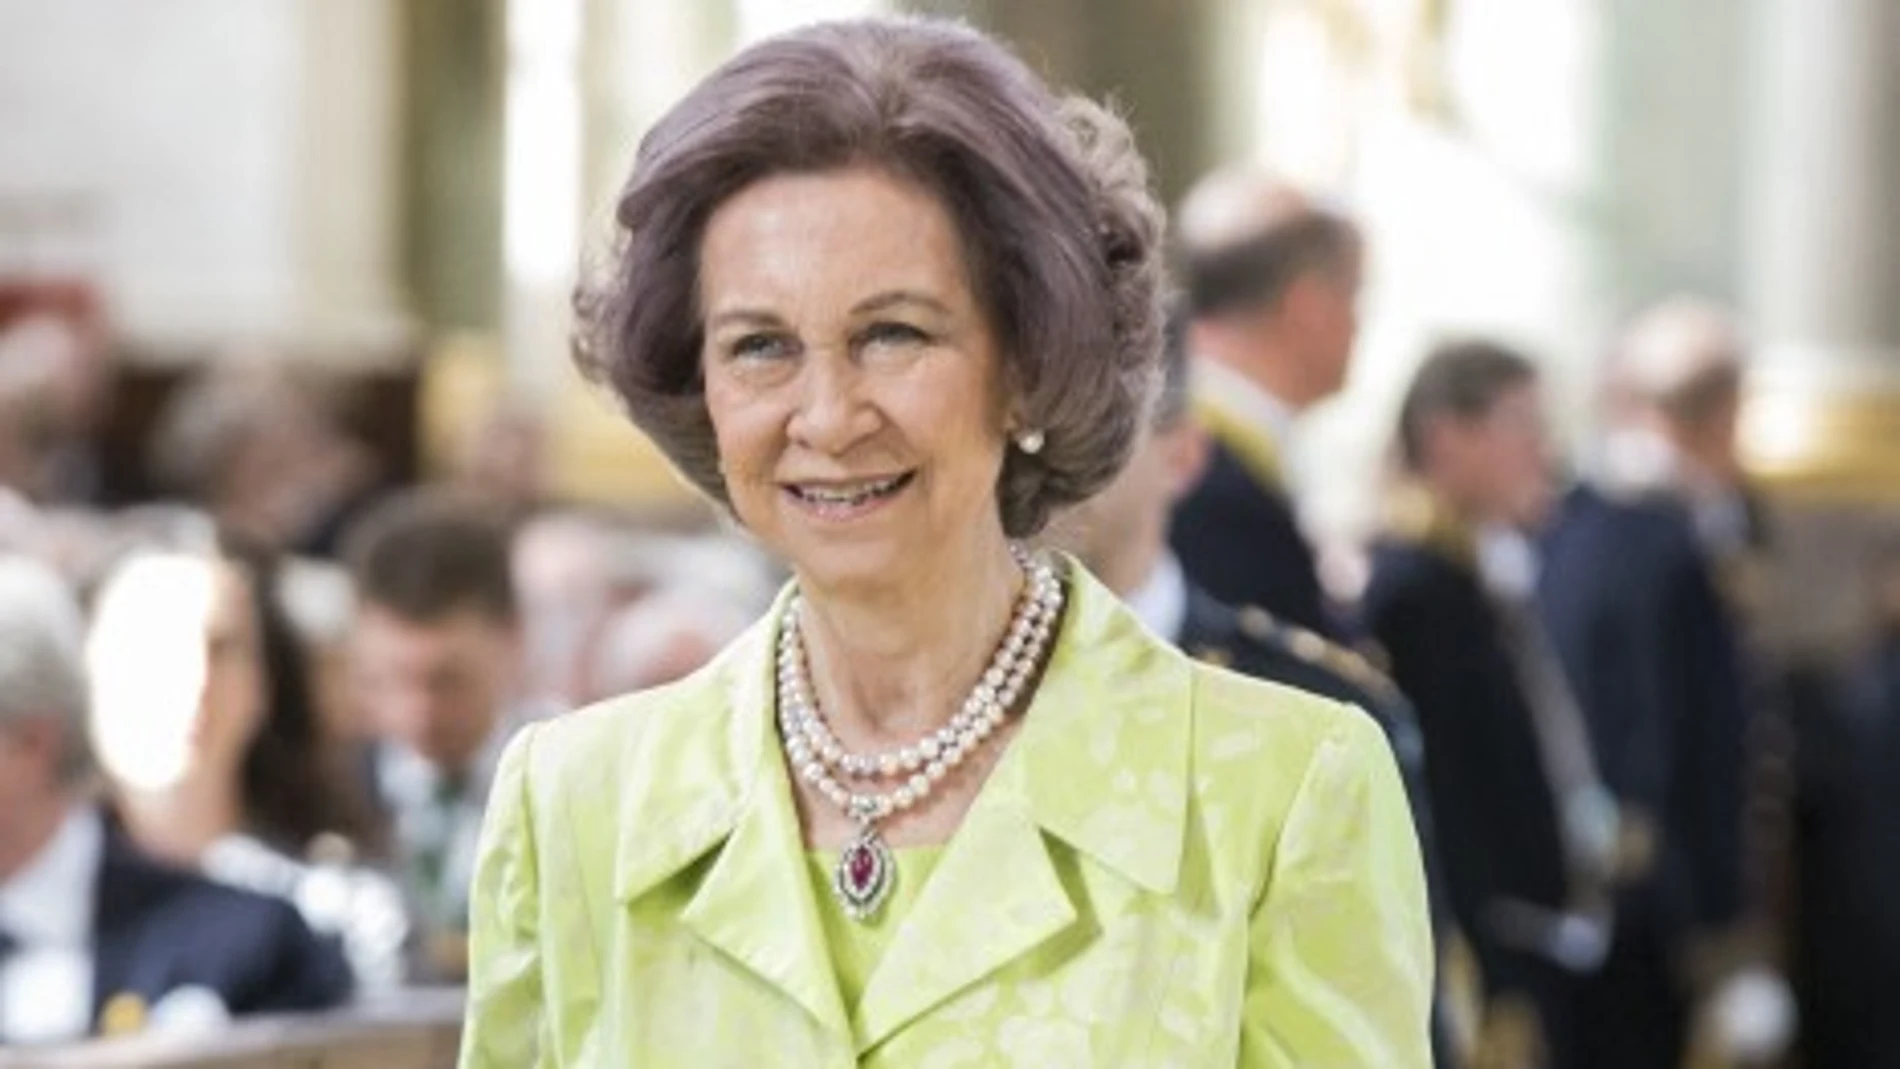 Former Queen Sofia of Spain attending Te Deum thanksgiving service at the RoyalPalace in connection with King Carl XVI Gustaf s 70th birthday April 30